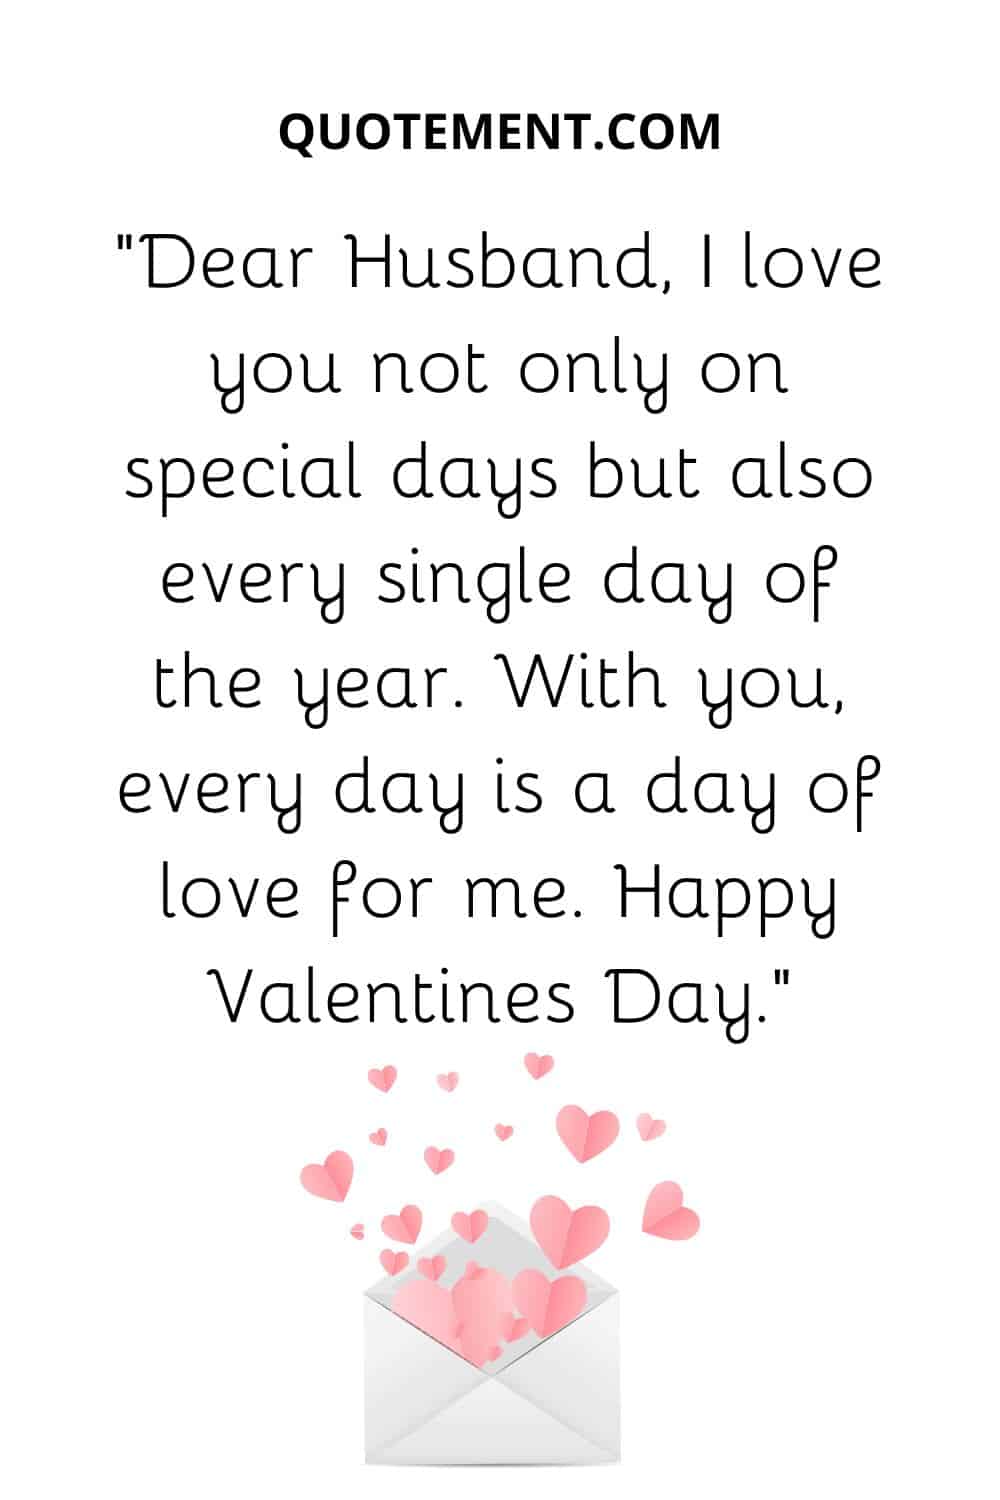 “Dear Husband, I love you not only on special days but also every single day of the year. With you, every day is a day of love for me. Happy Valentines Day.”